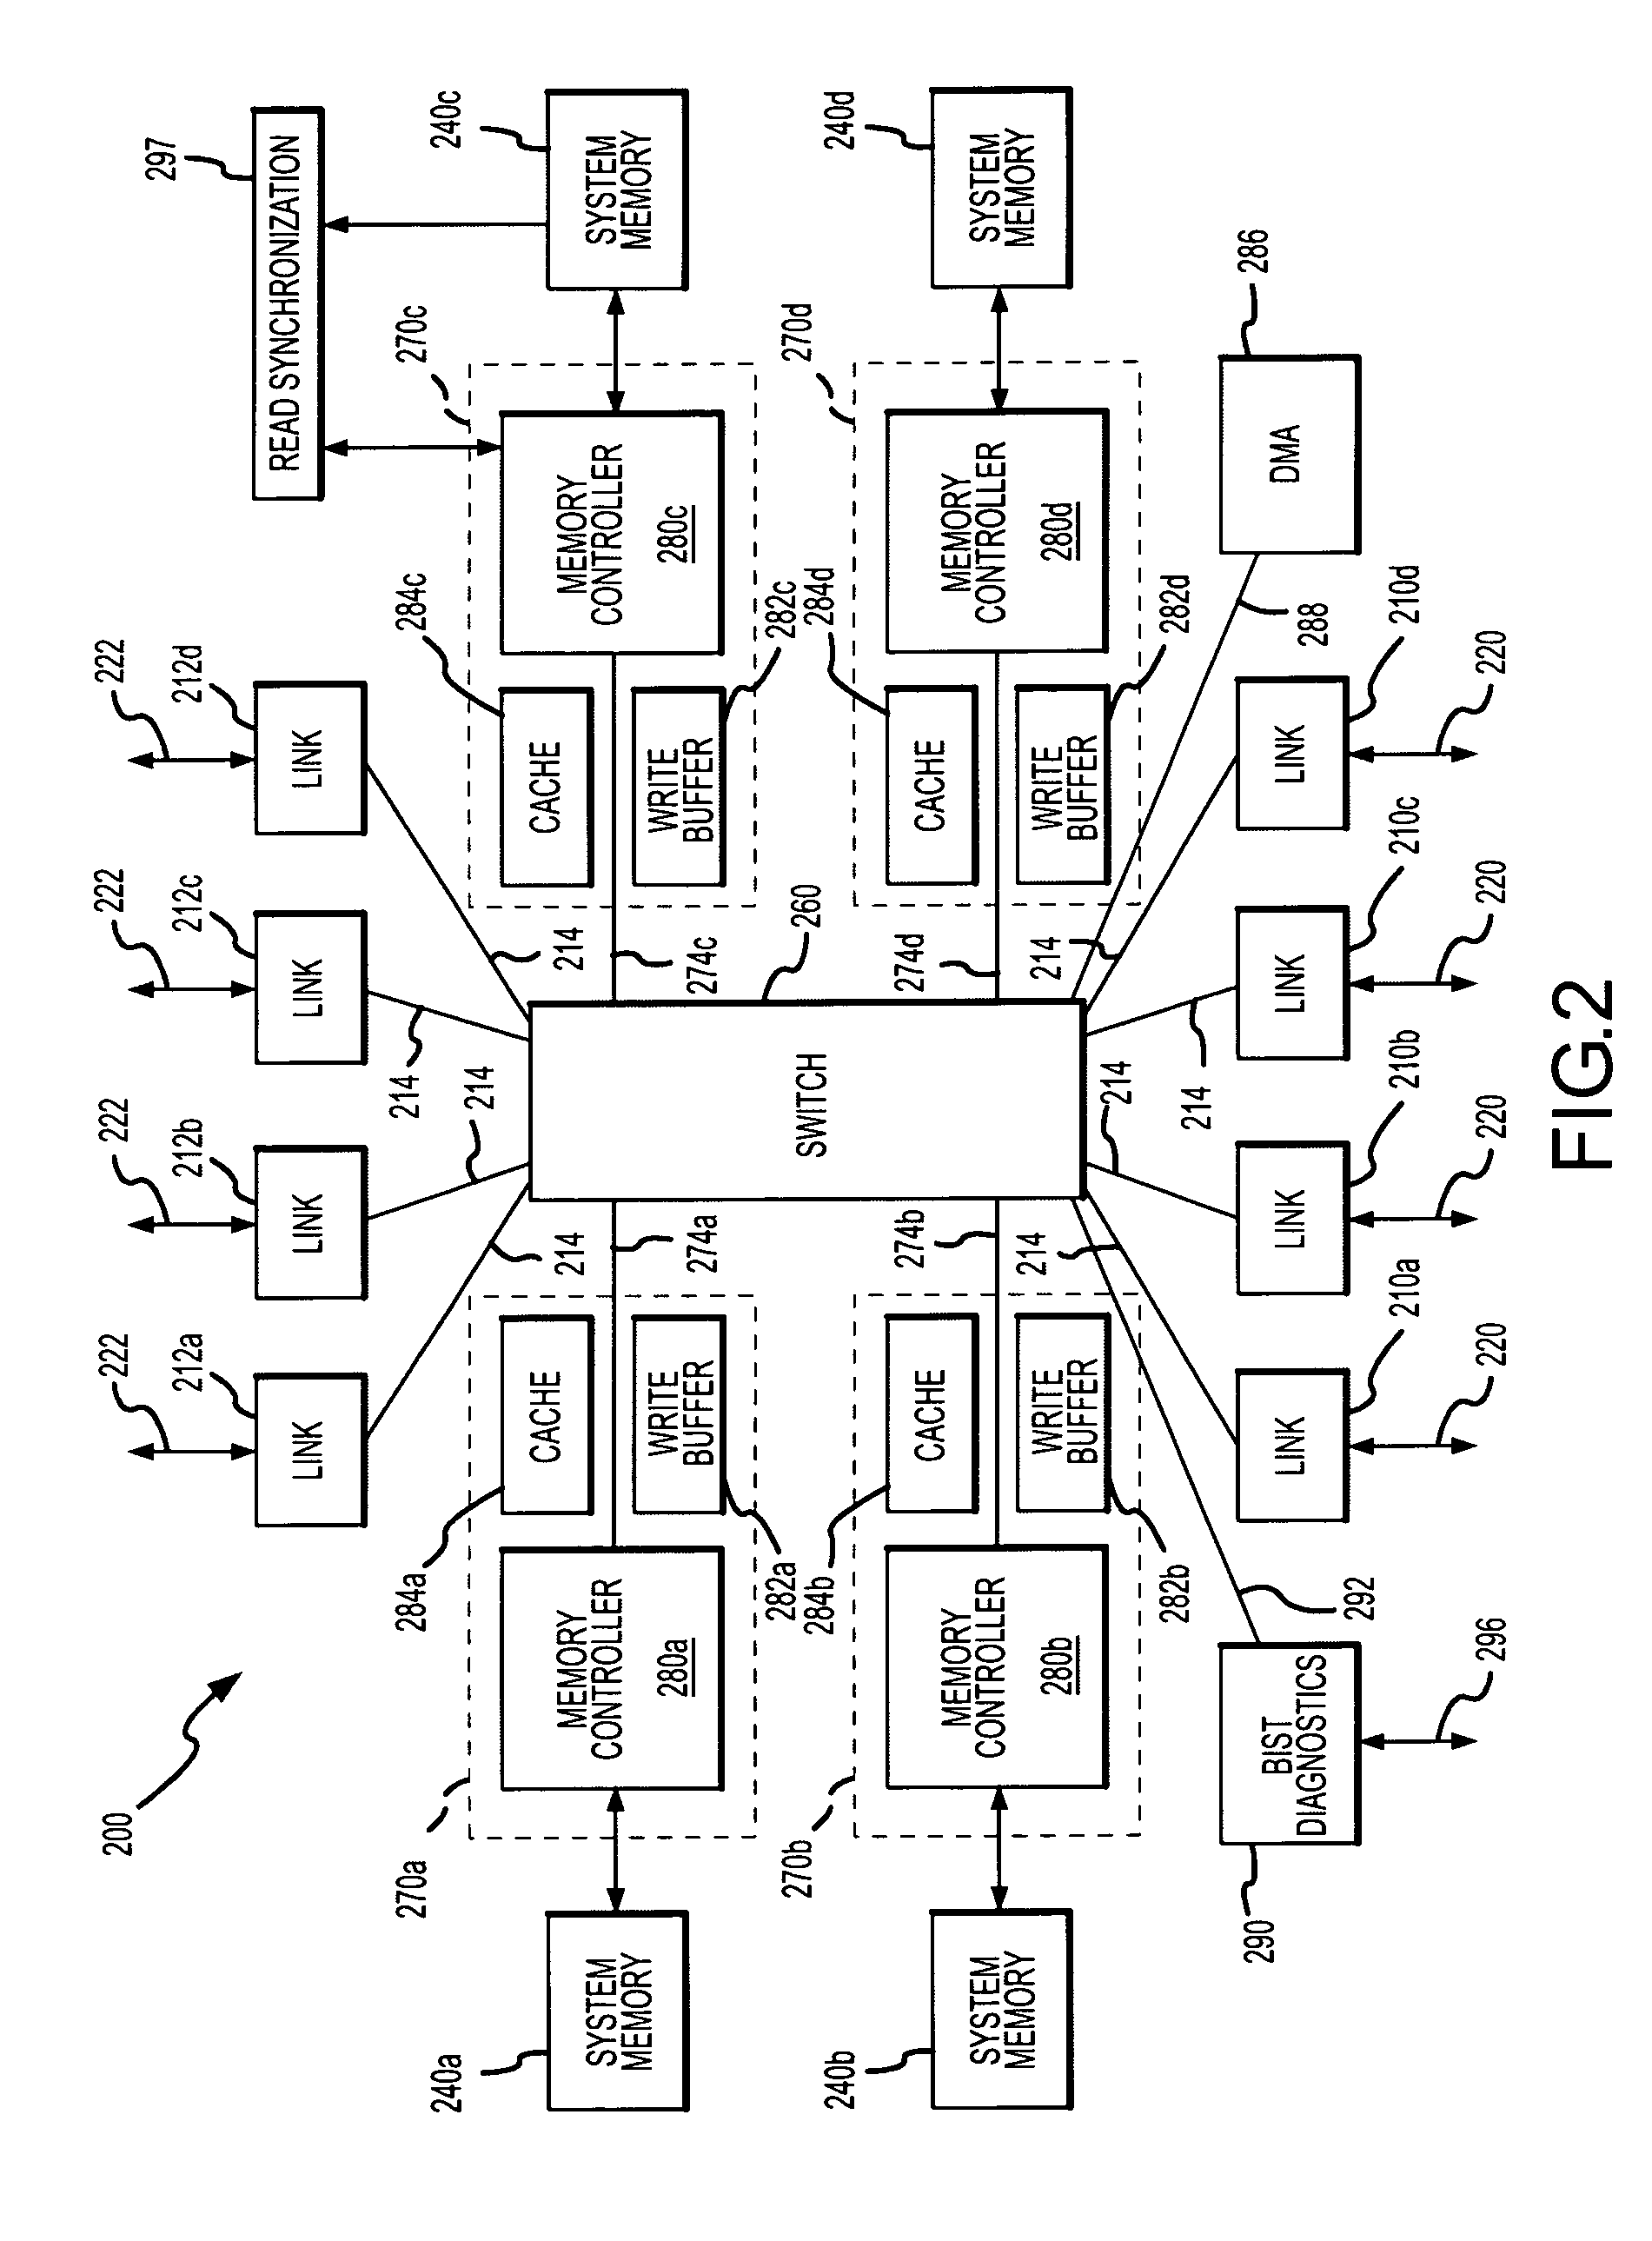 System and method for read synchronization of memory modules